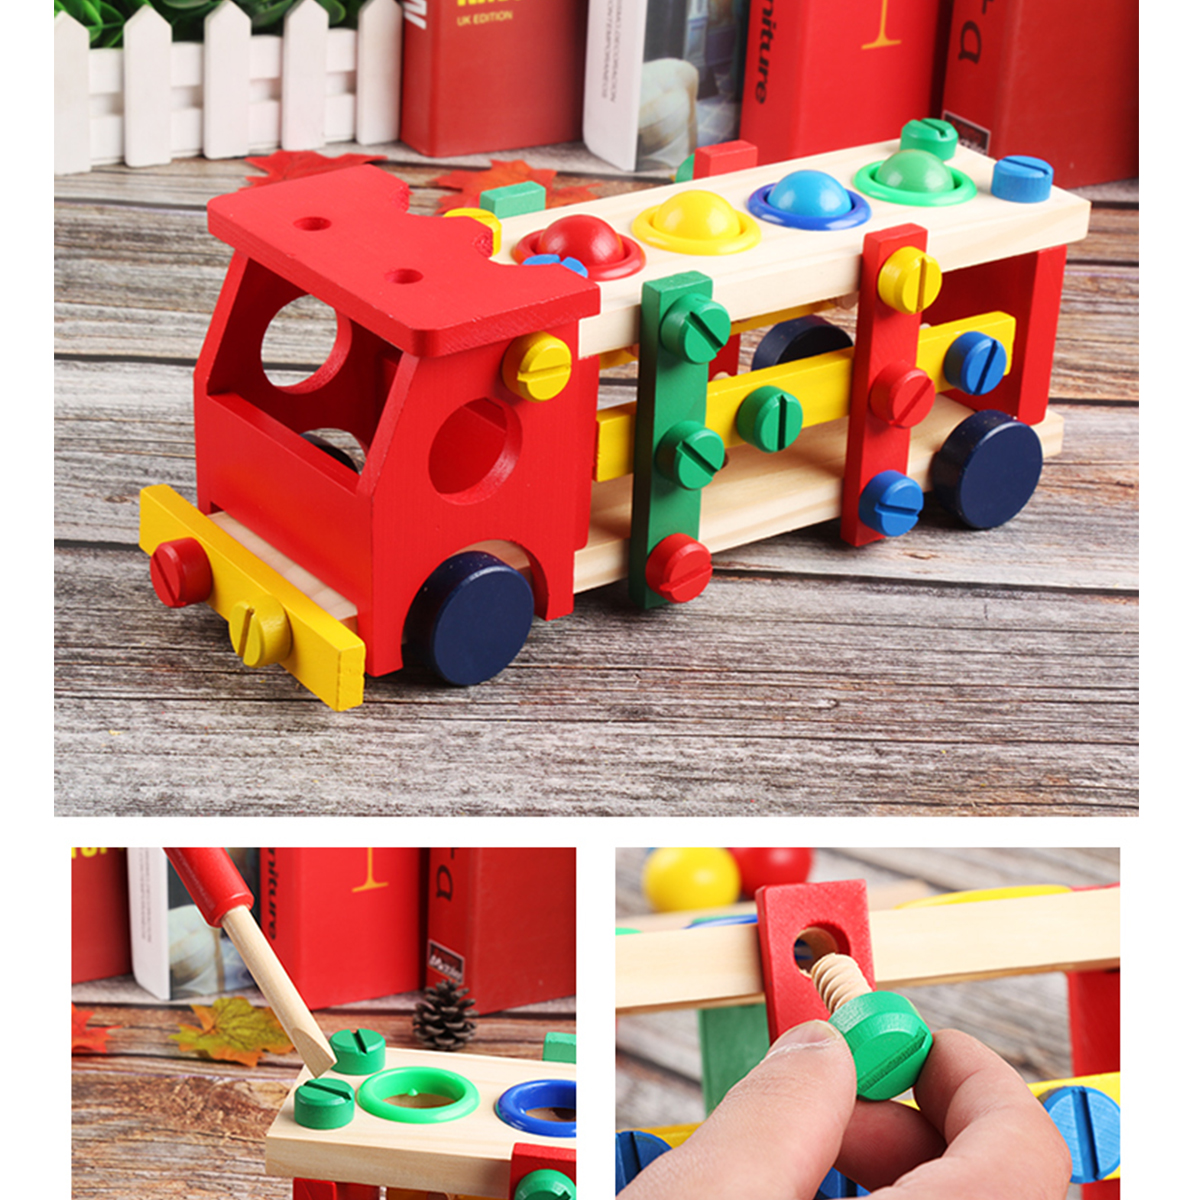 DIY-Educational-Toys-Kids-Exercise-Practical-Wooden-IQ-Game-Car-Assemble-Building-Gift-Training-Brai-1598139-9